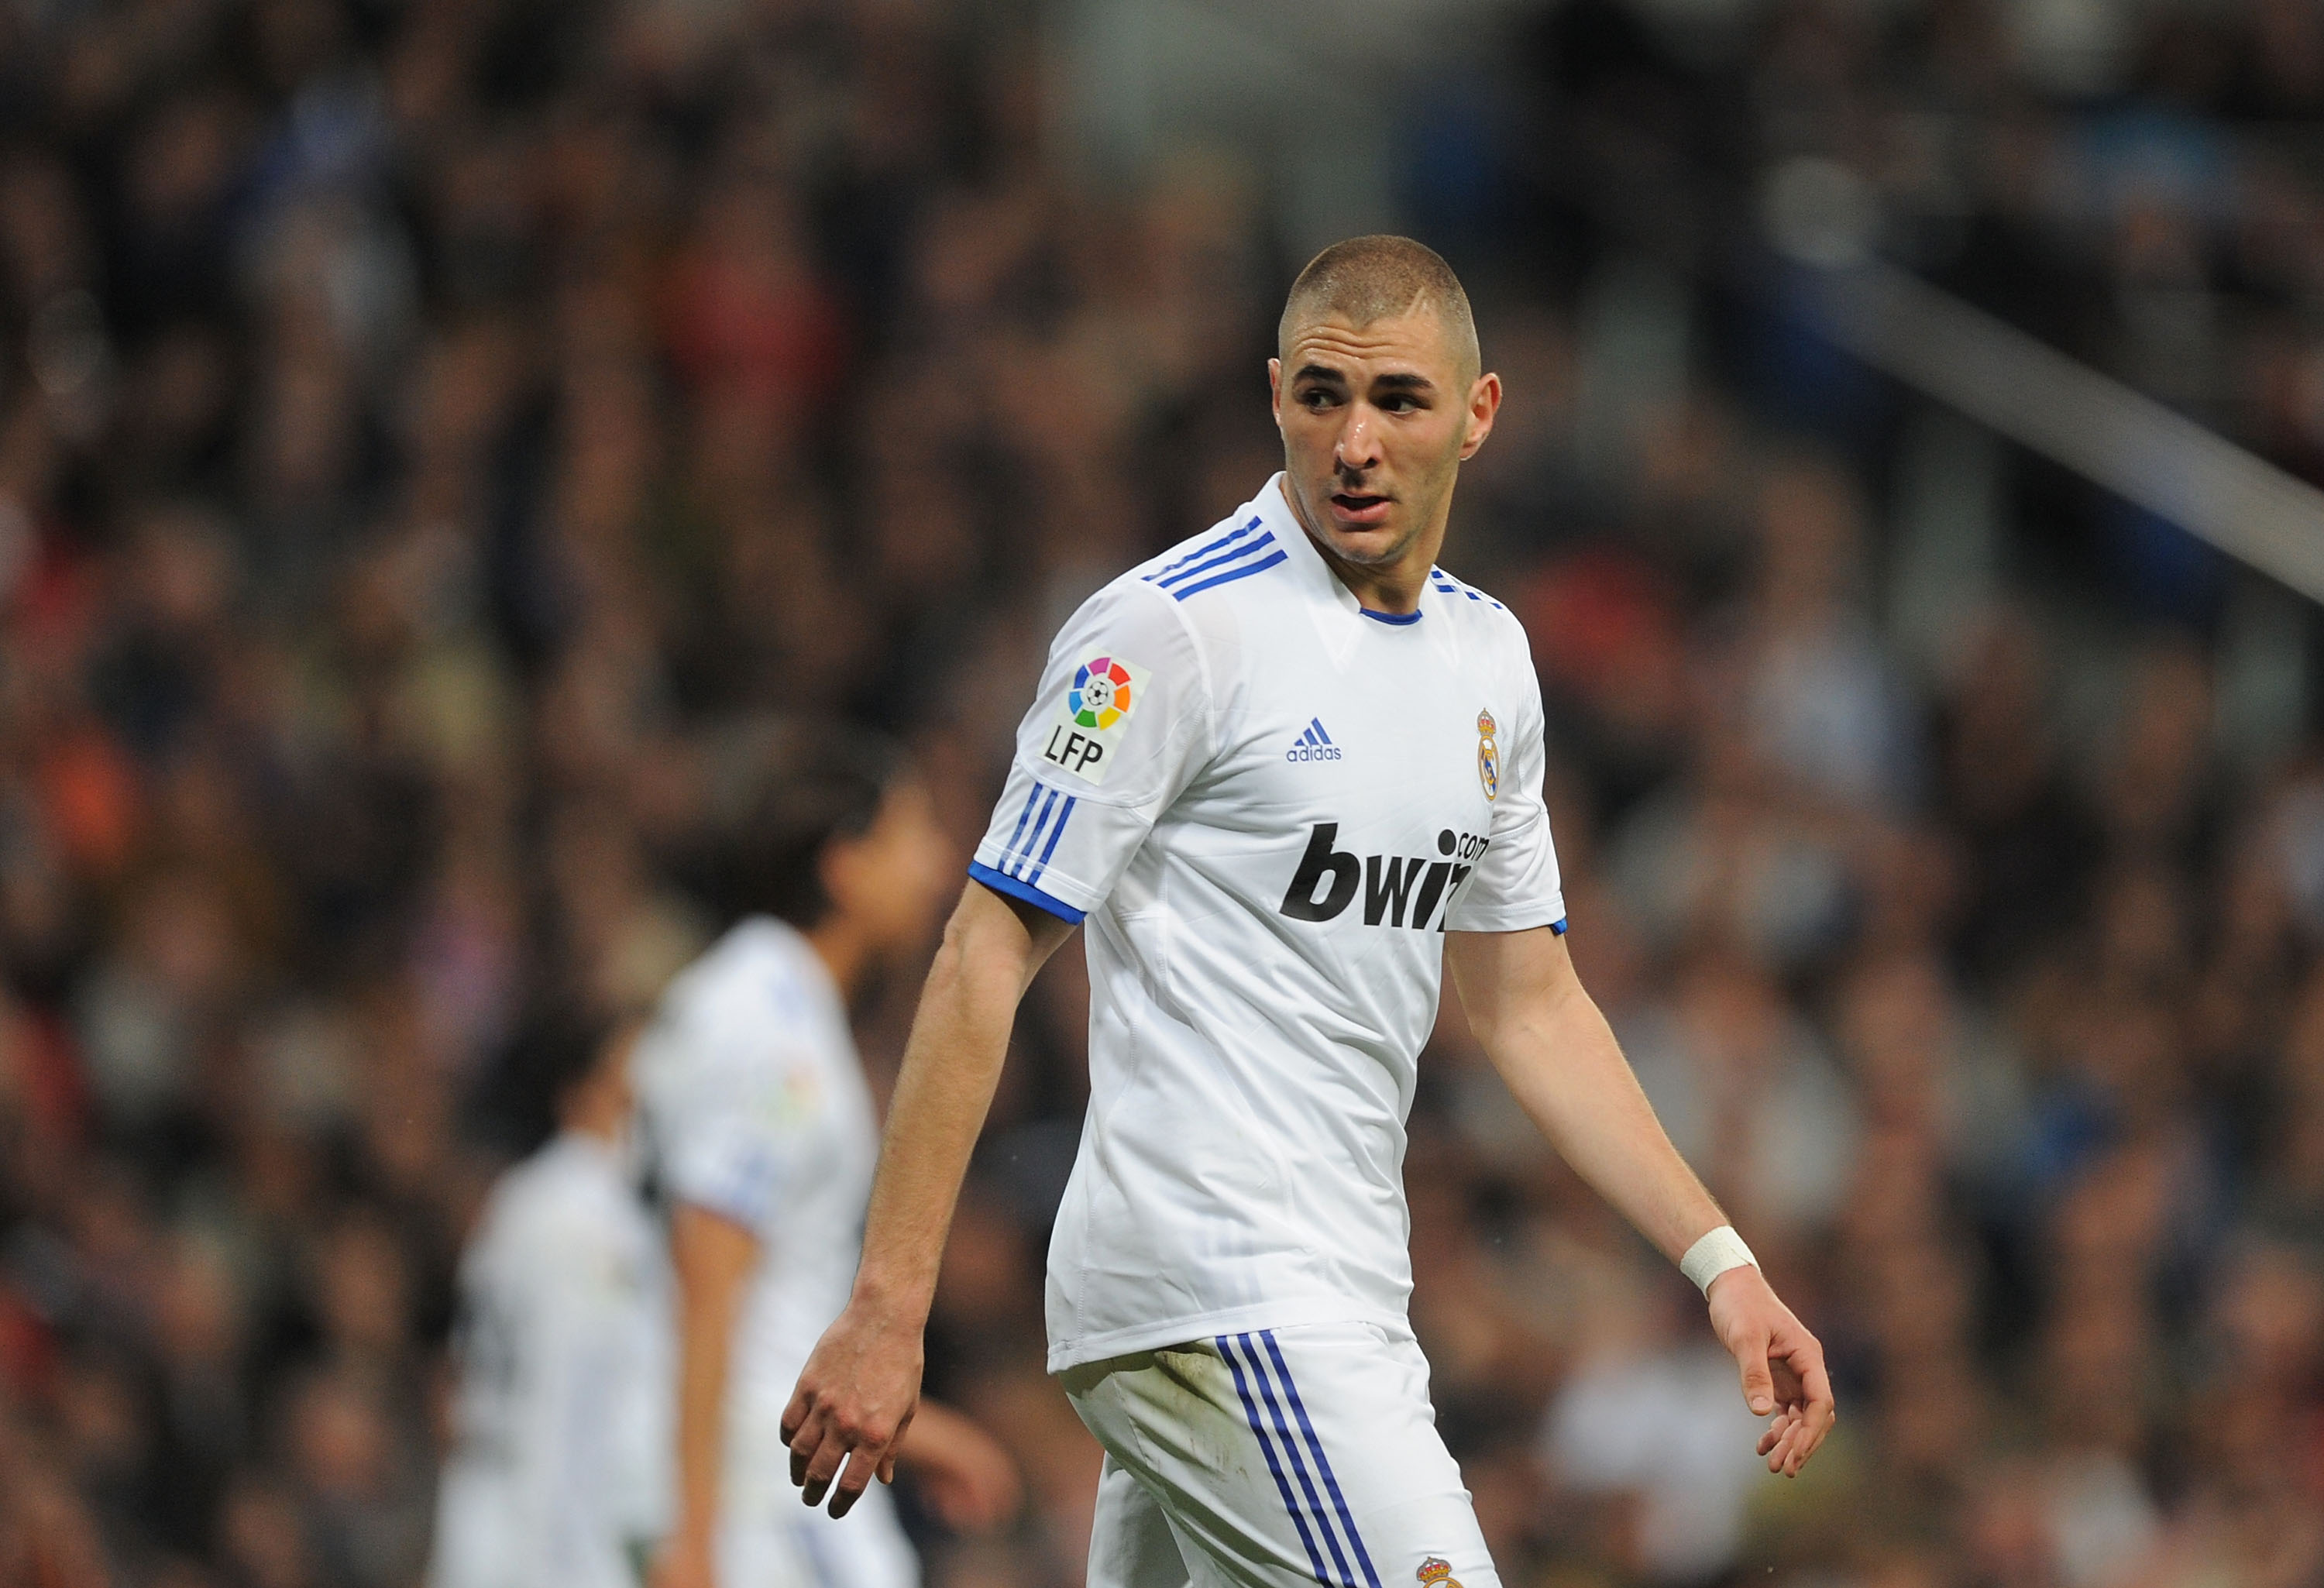 MADRID, SPAIN - MARCH 12:  Karim Benzema of Real Madrid during the La Liga match between Real Madrid and Hercules CF at Estadio Santiago Bernabeu on March 12, 2011 in Madrid, Spain.  (Photo by Denis Doyle/Getty Images)